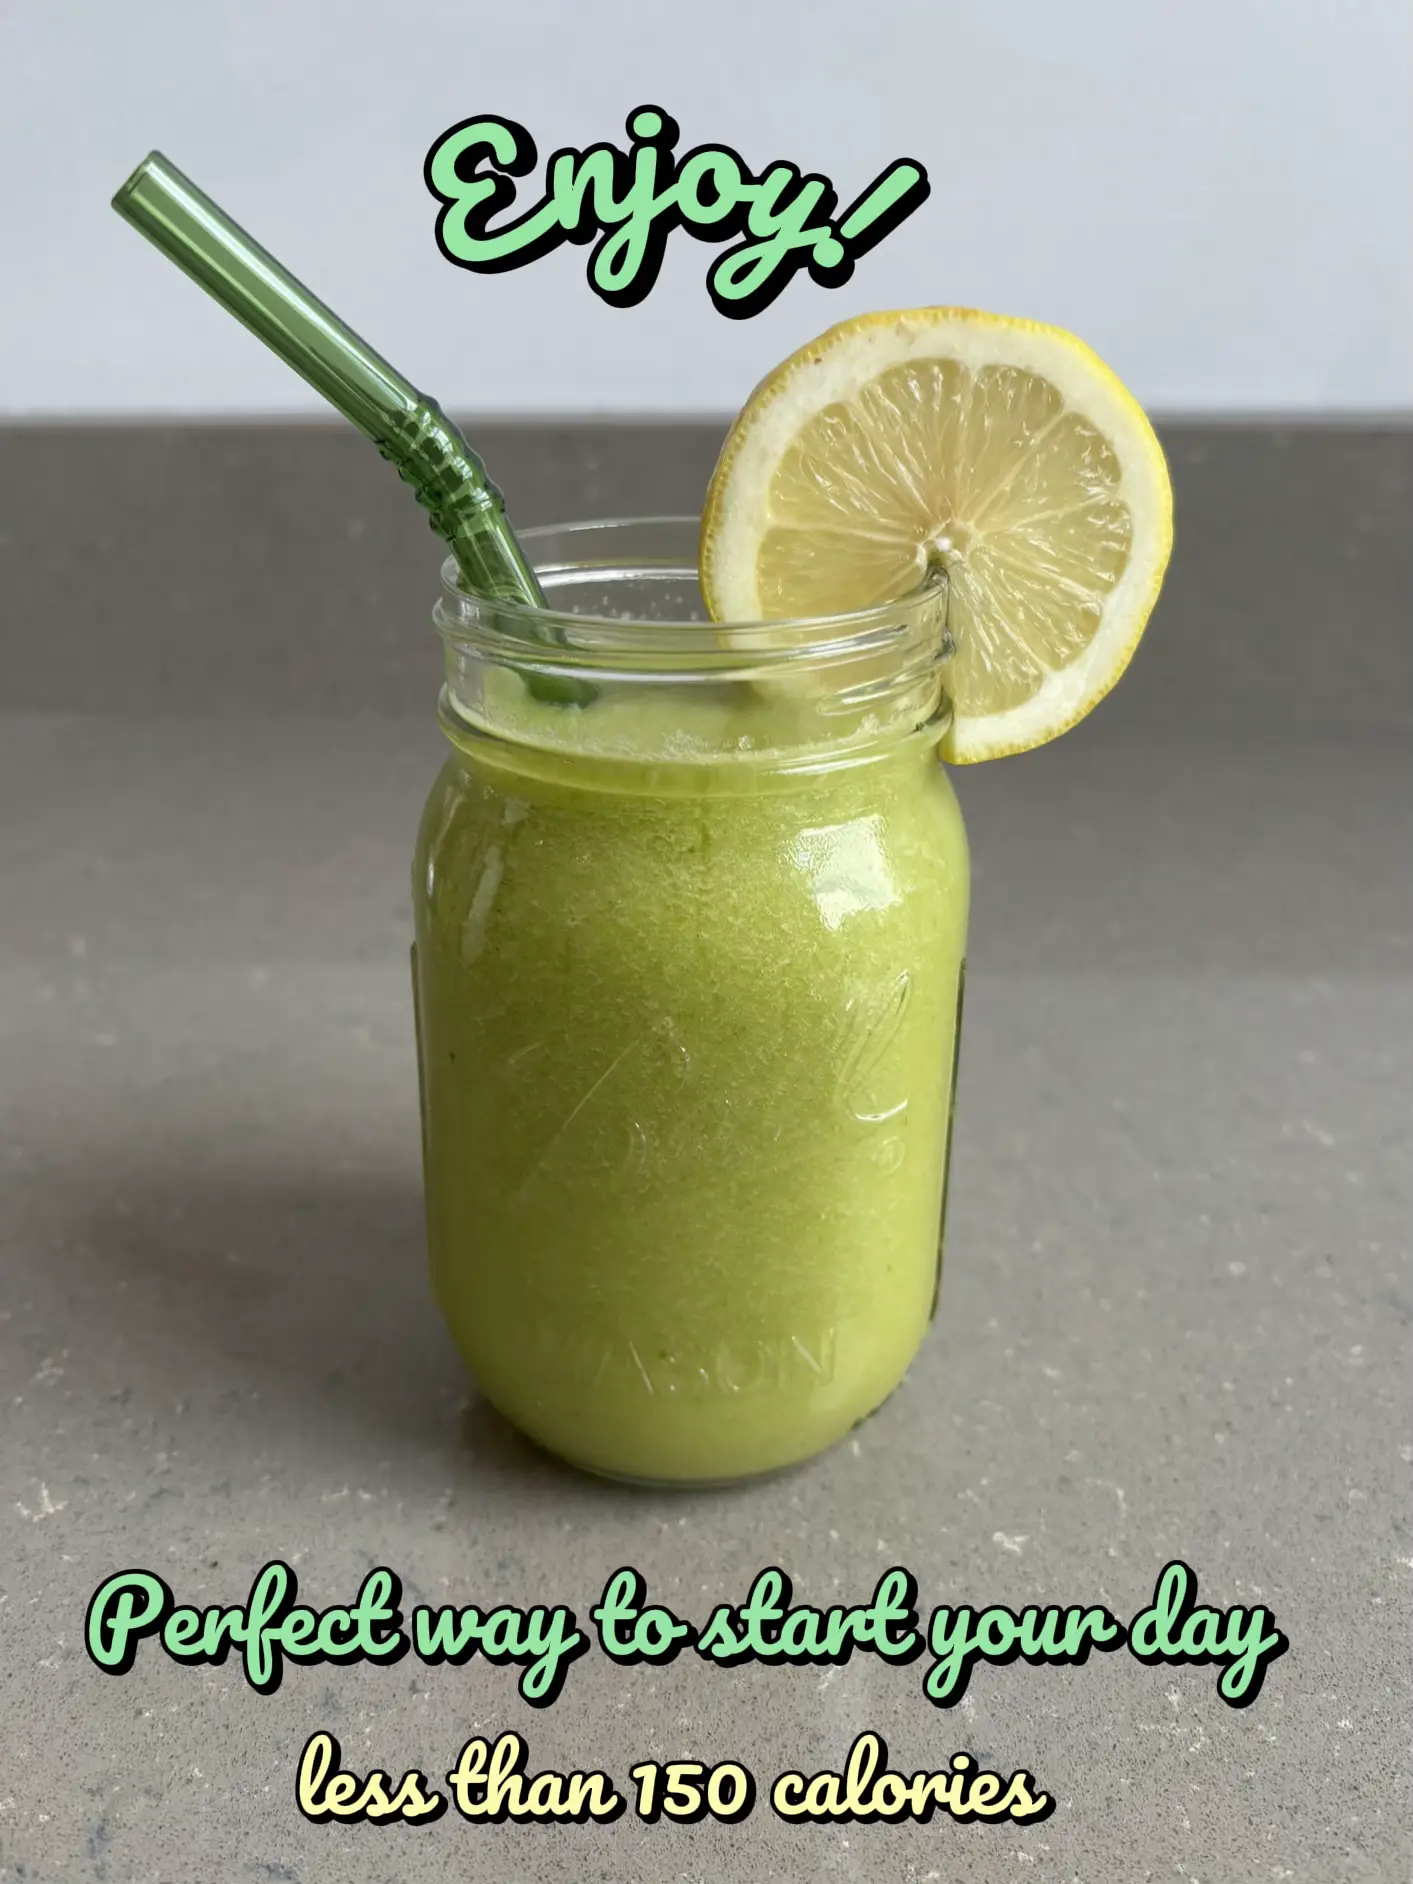 10 Day Green Smoothie Cleanse: Sip Up, Slim Down ! Lose upto 15 Lbs in 10  Days!: 100 Delicious Weight Loss Green Smoothies+ 10 Days Diet Plan to lose  weight fast eBook 